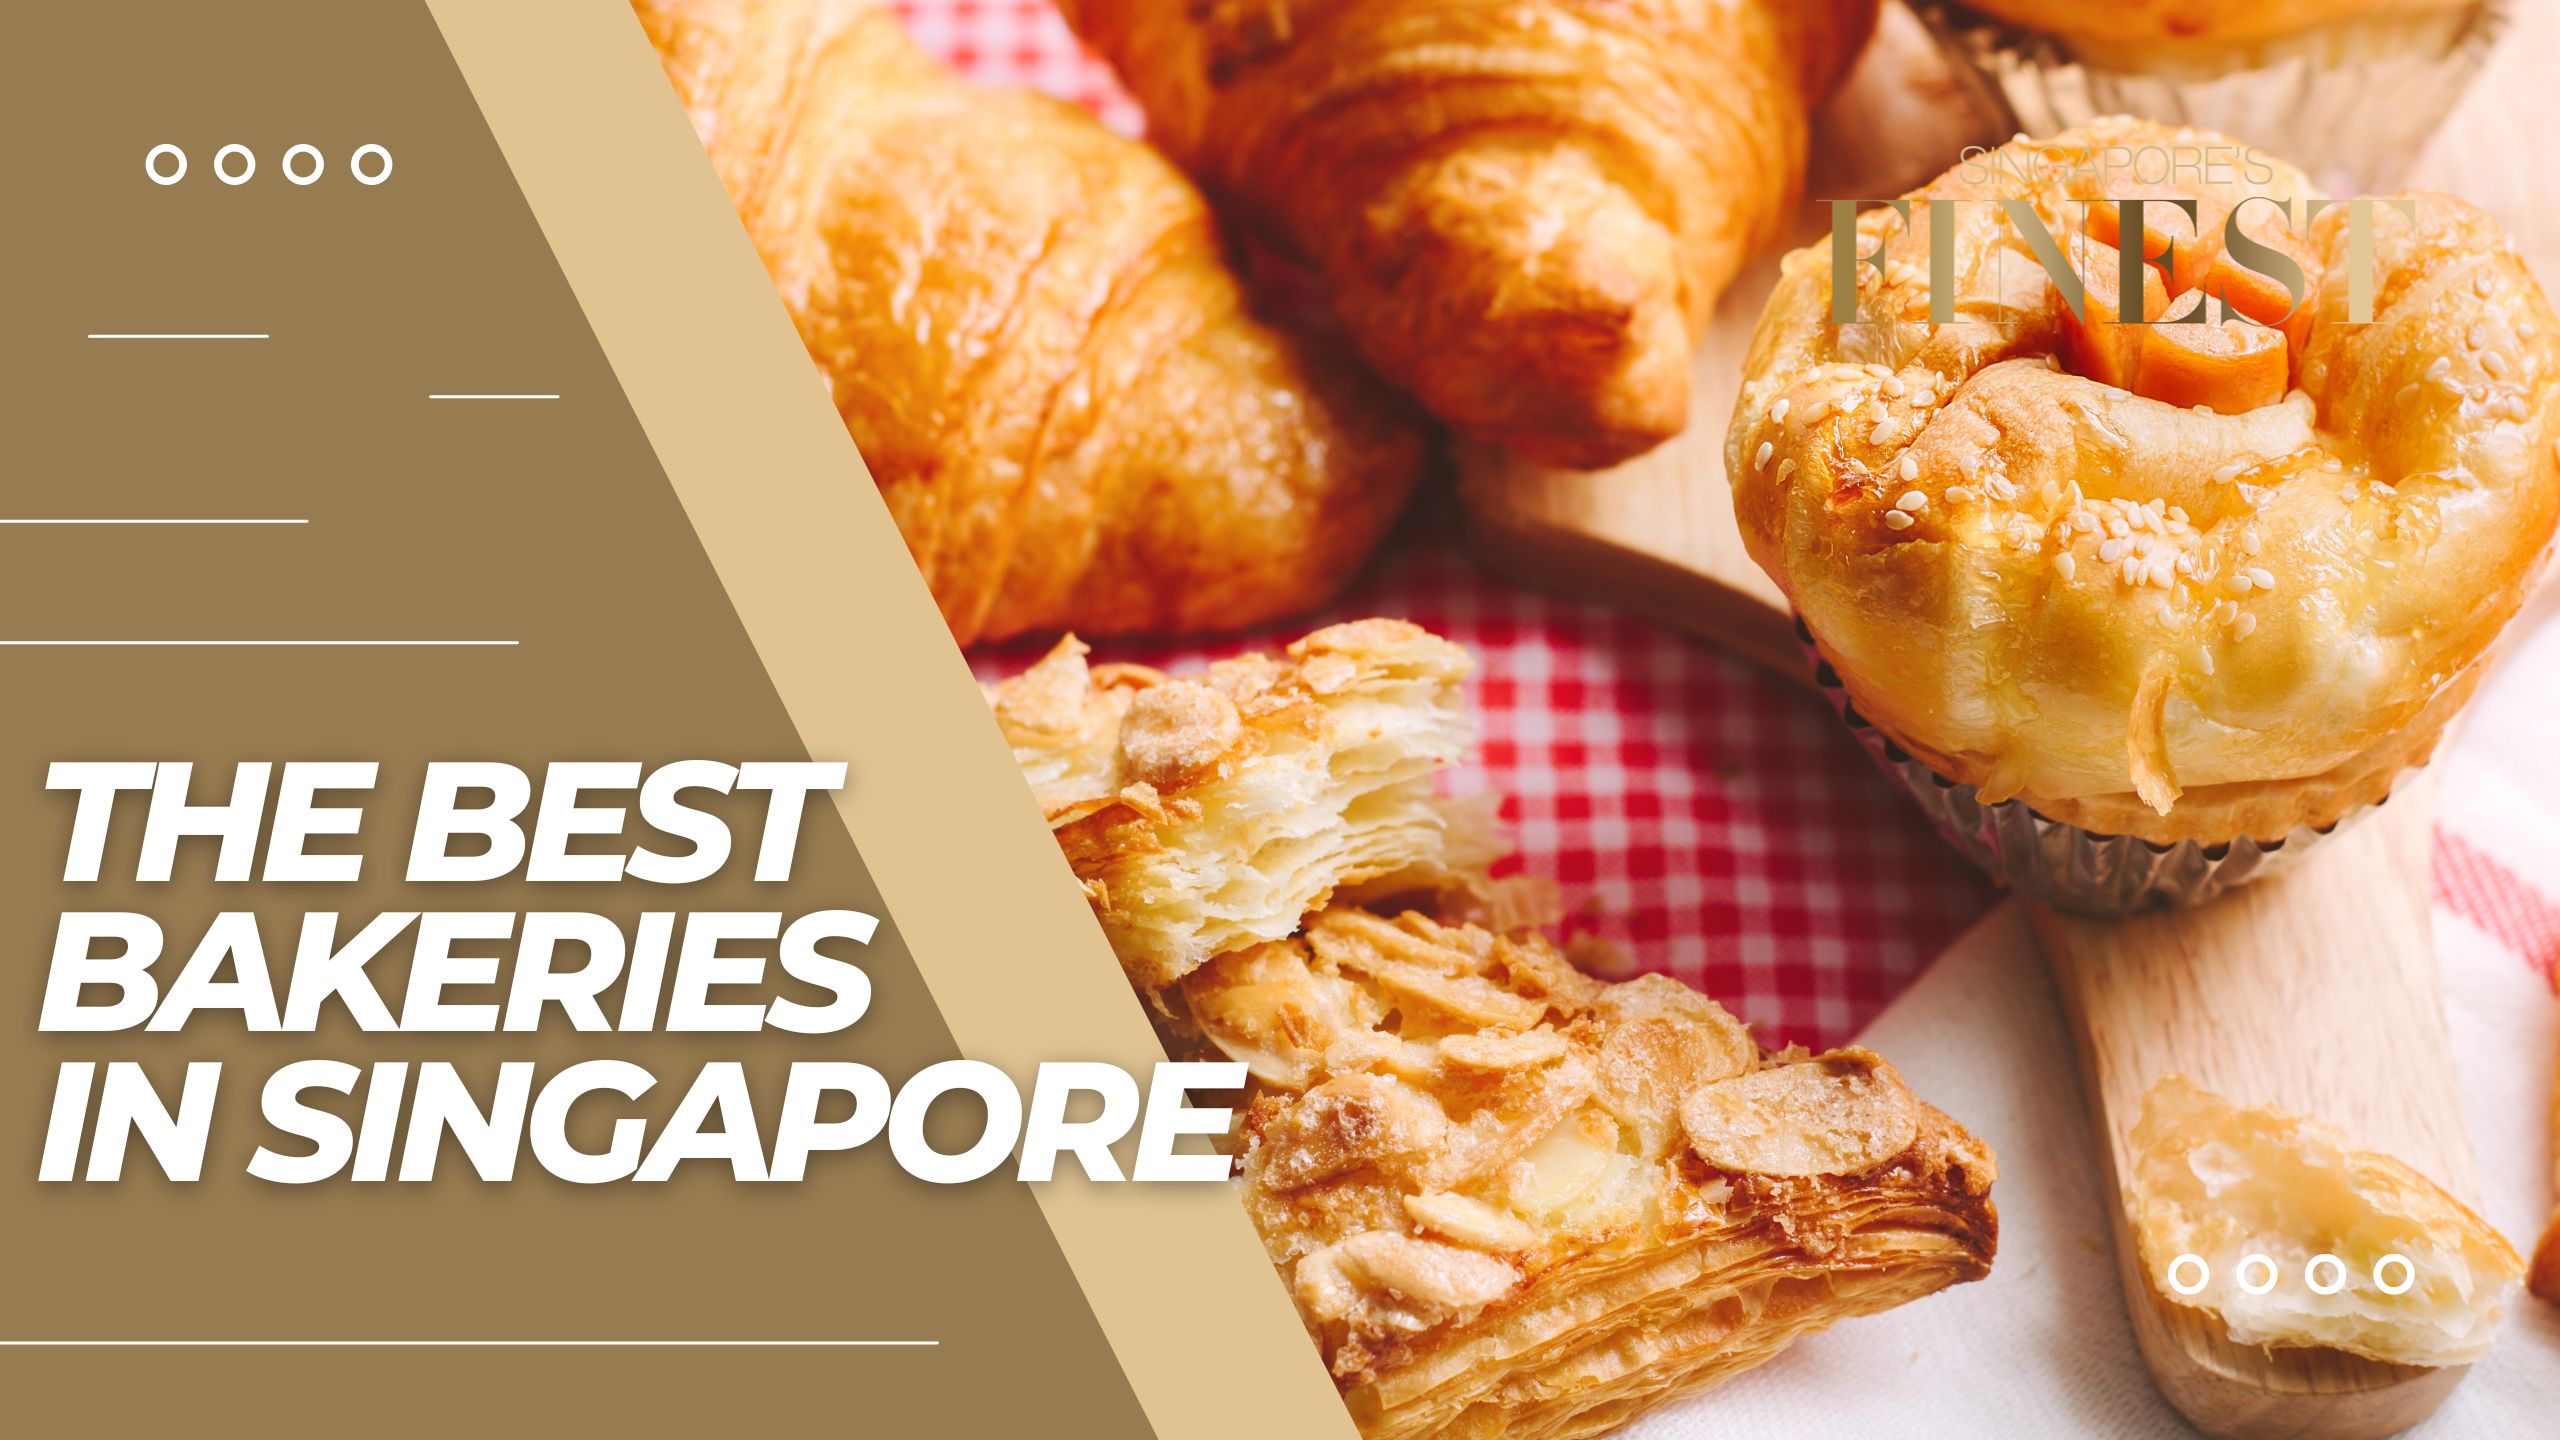 The Finest Bakeries in Singapore